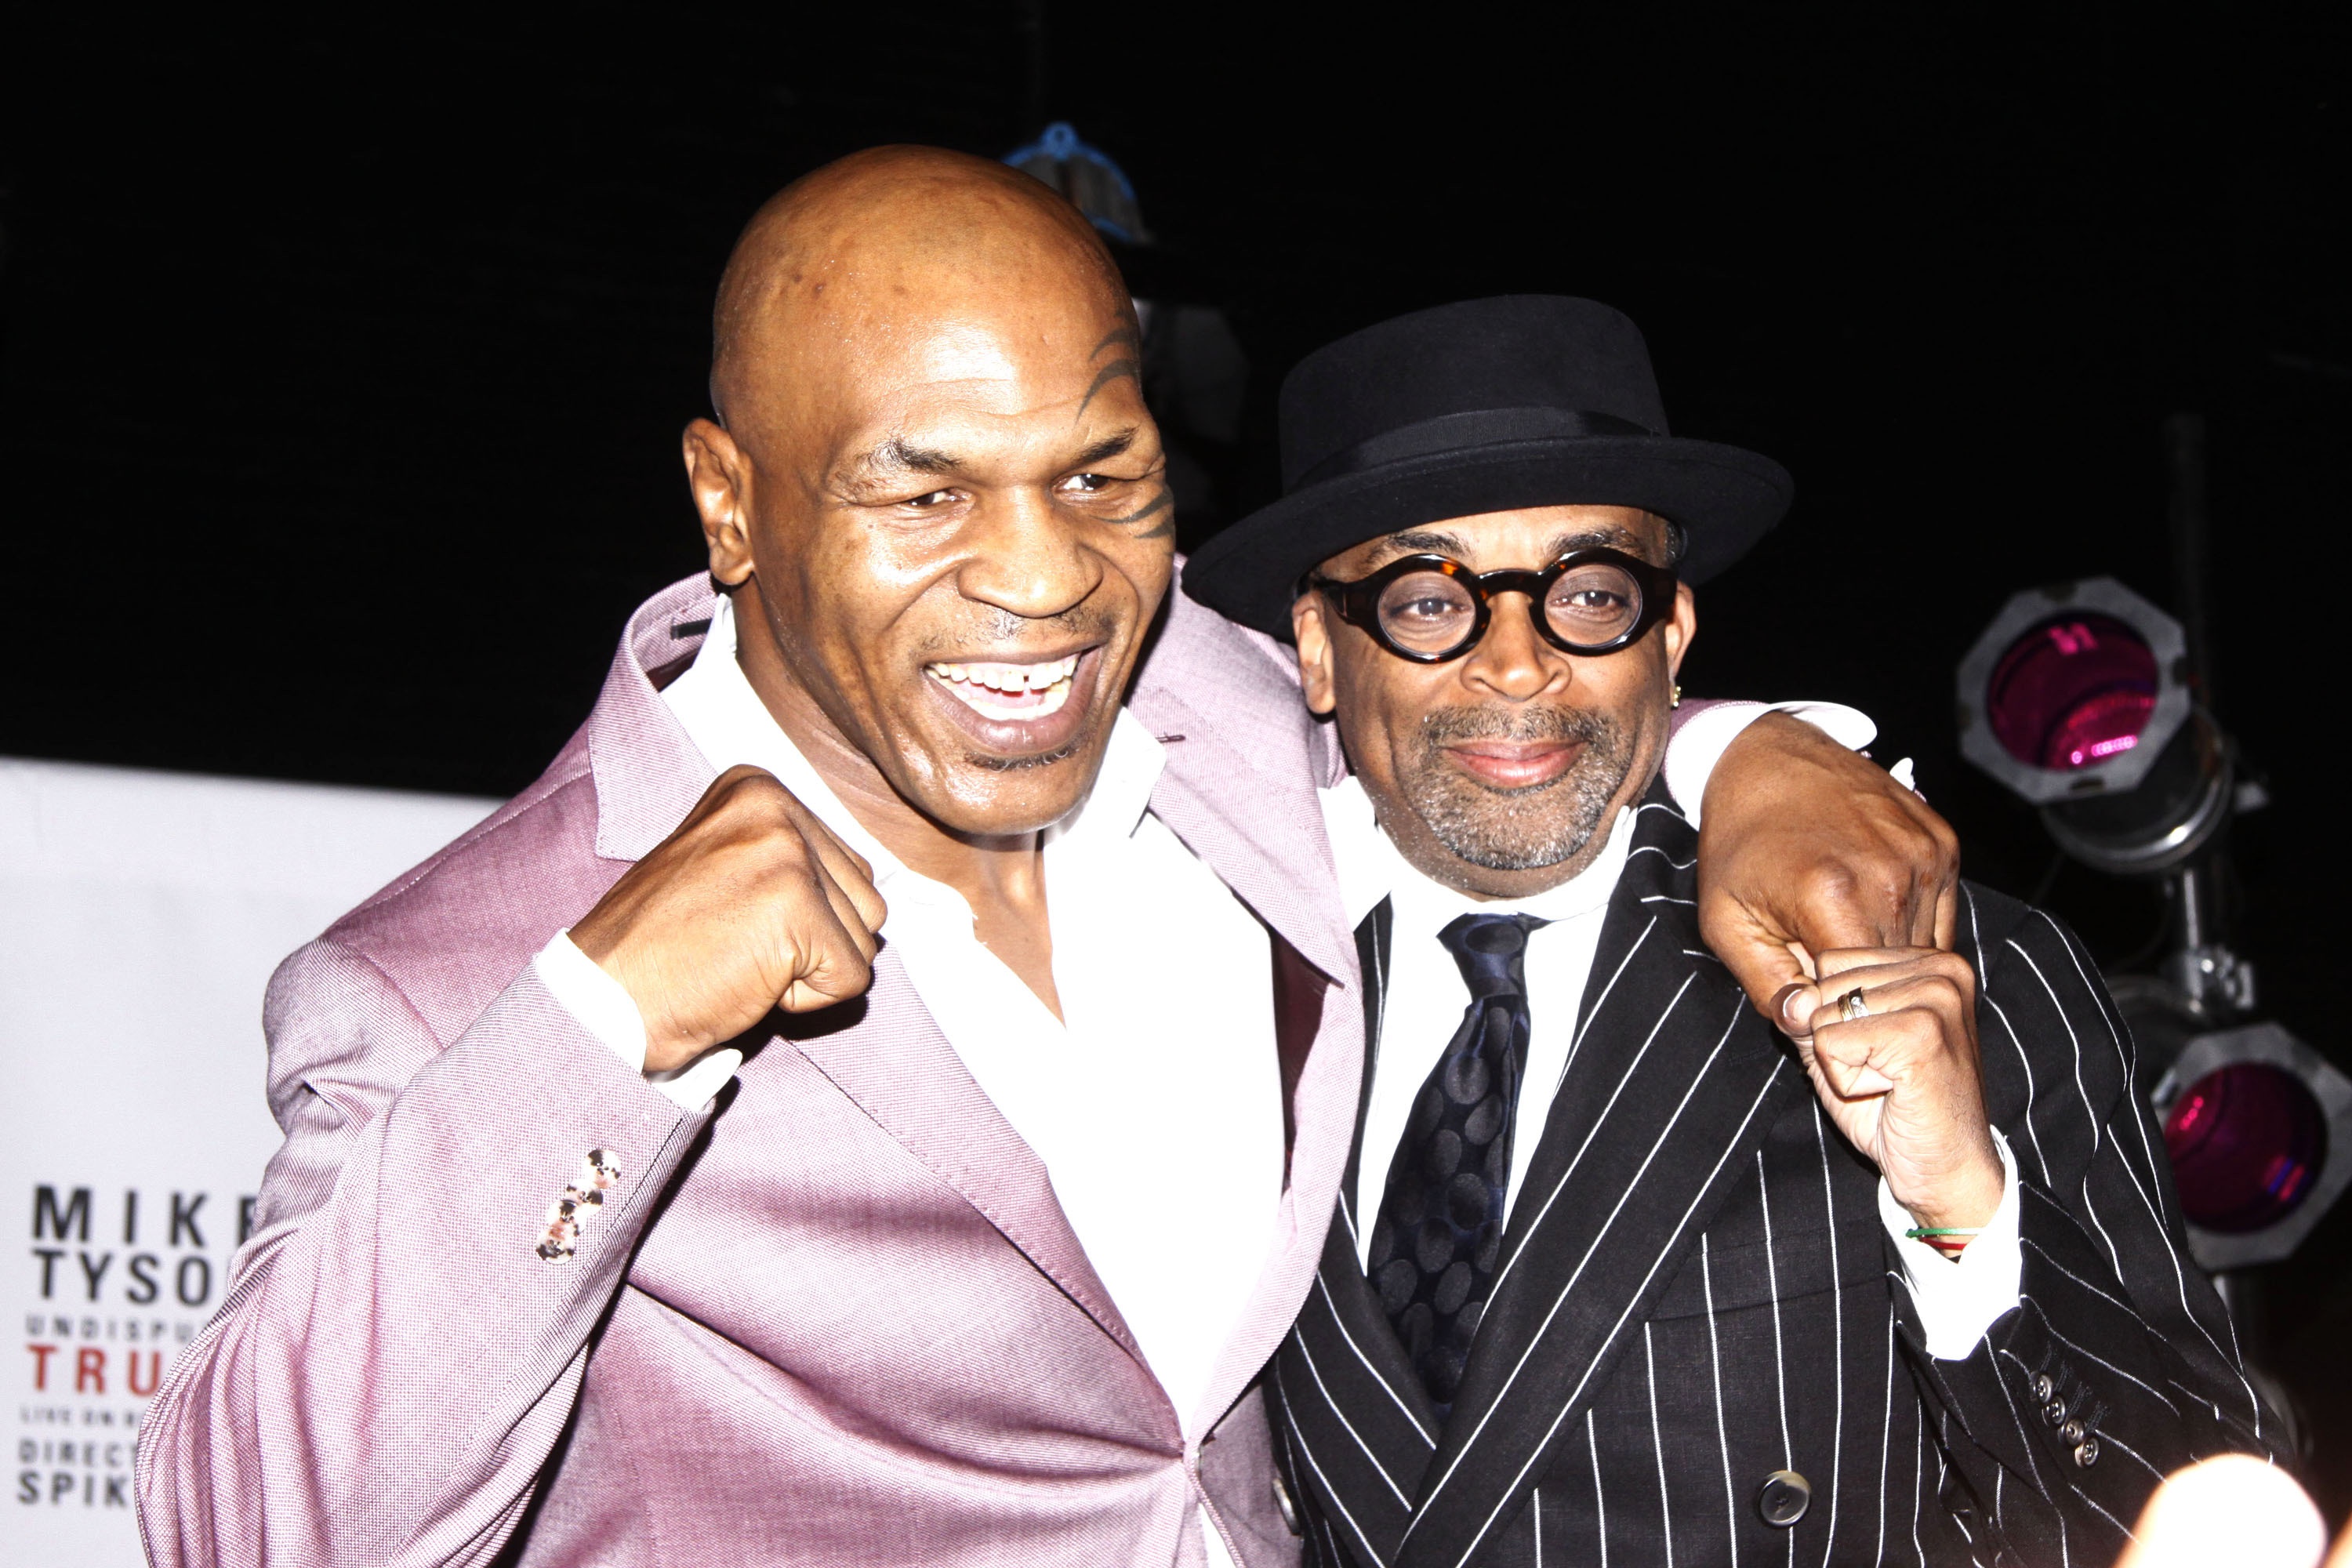 mike tyson and spike lee round 2